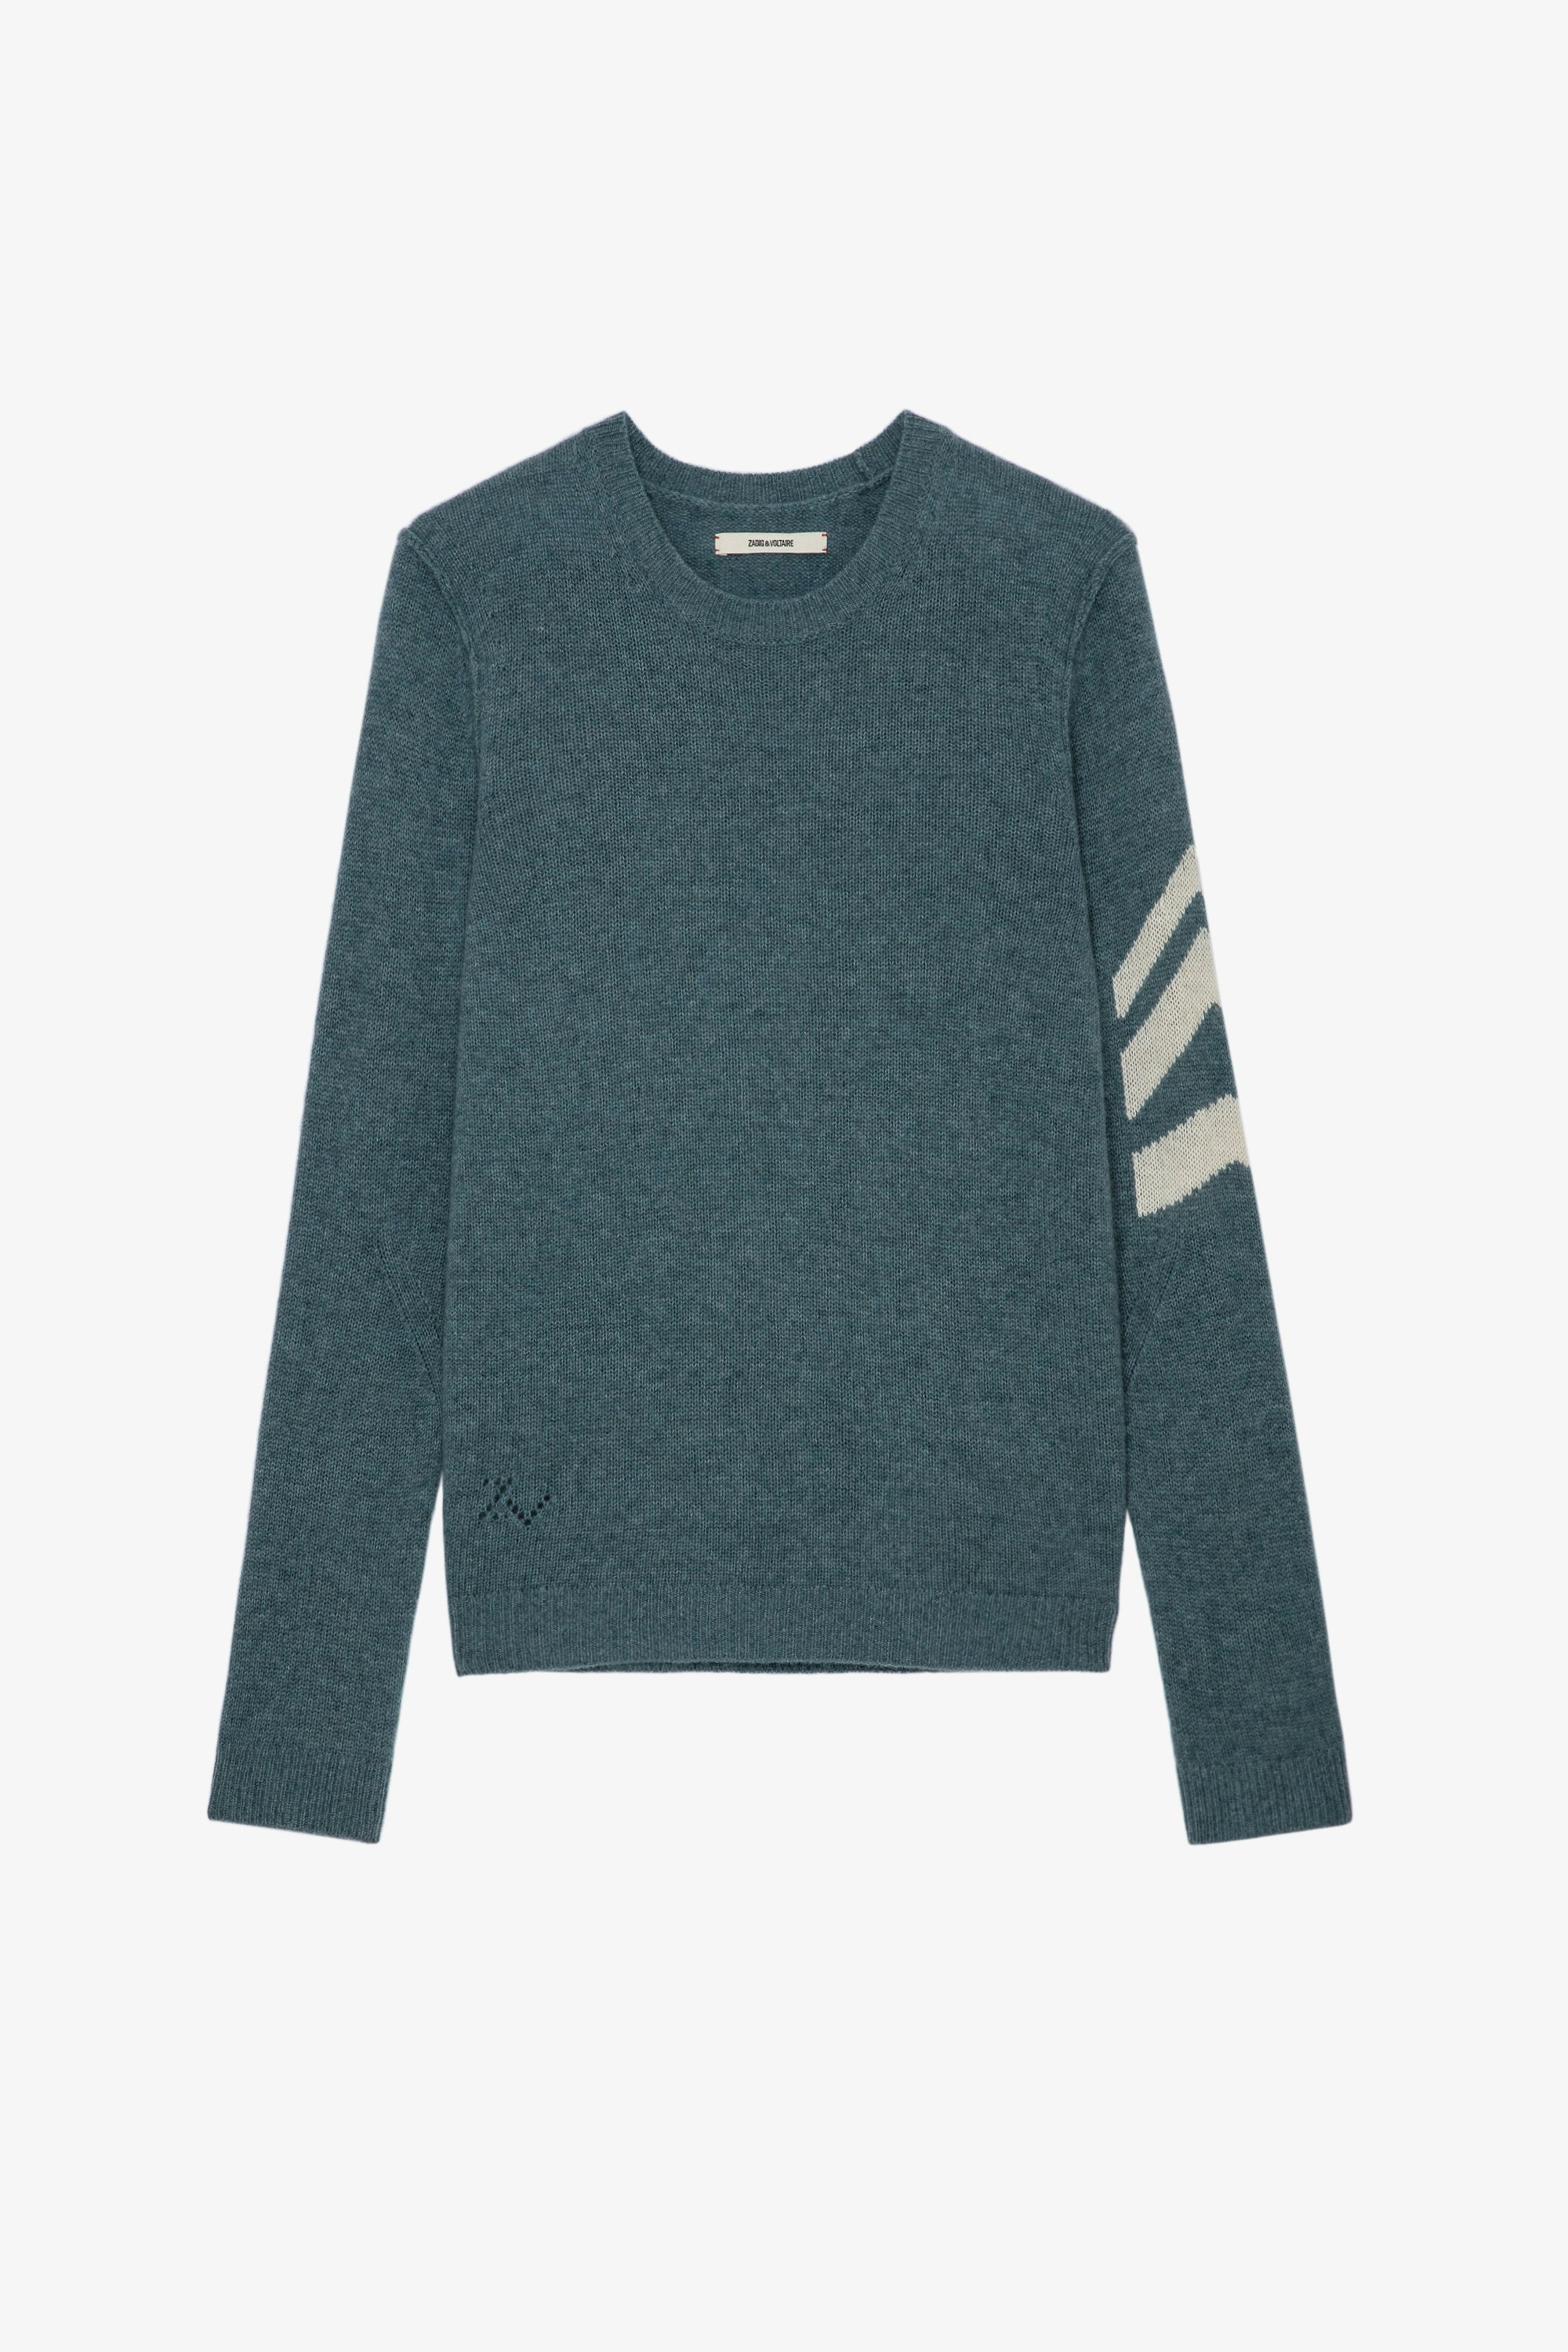 Kennedy Arrow Cashmere Sweater Men’s green cashmere jumper featuring arrows on the sleeve